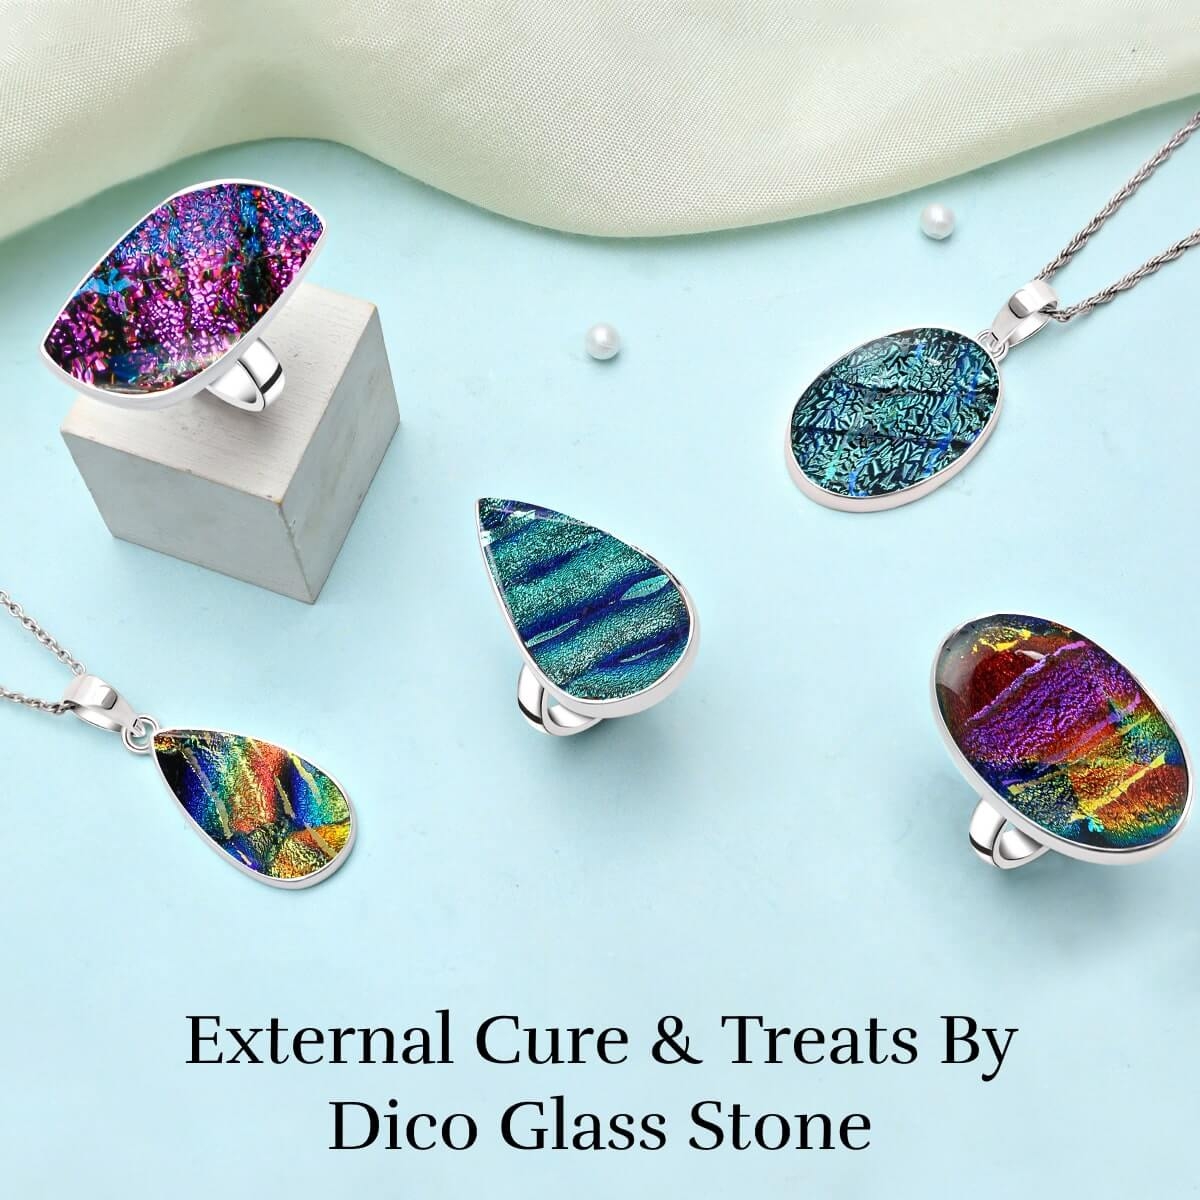 Physical Healing of Dico Glass Stone